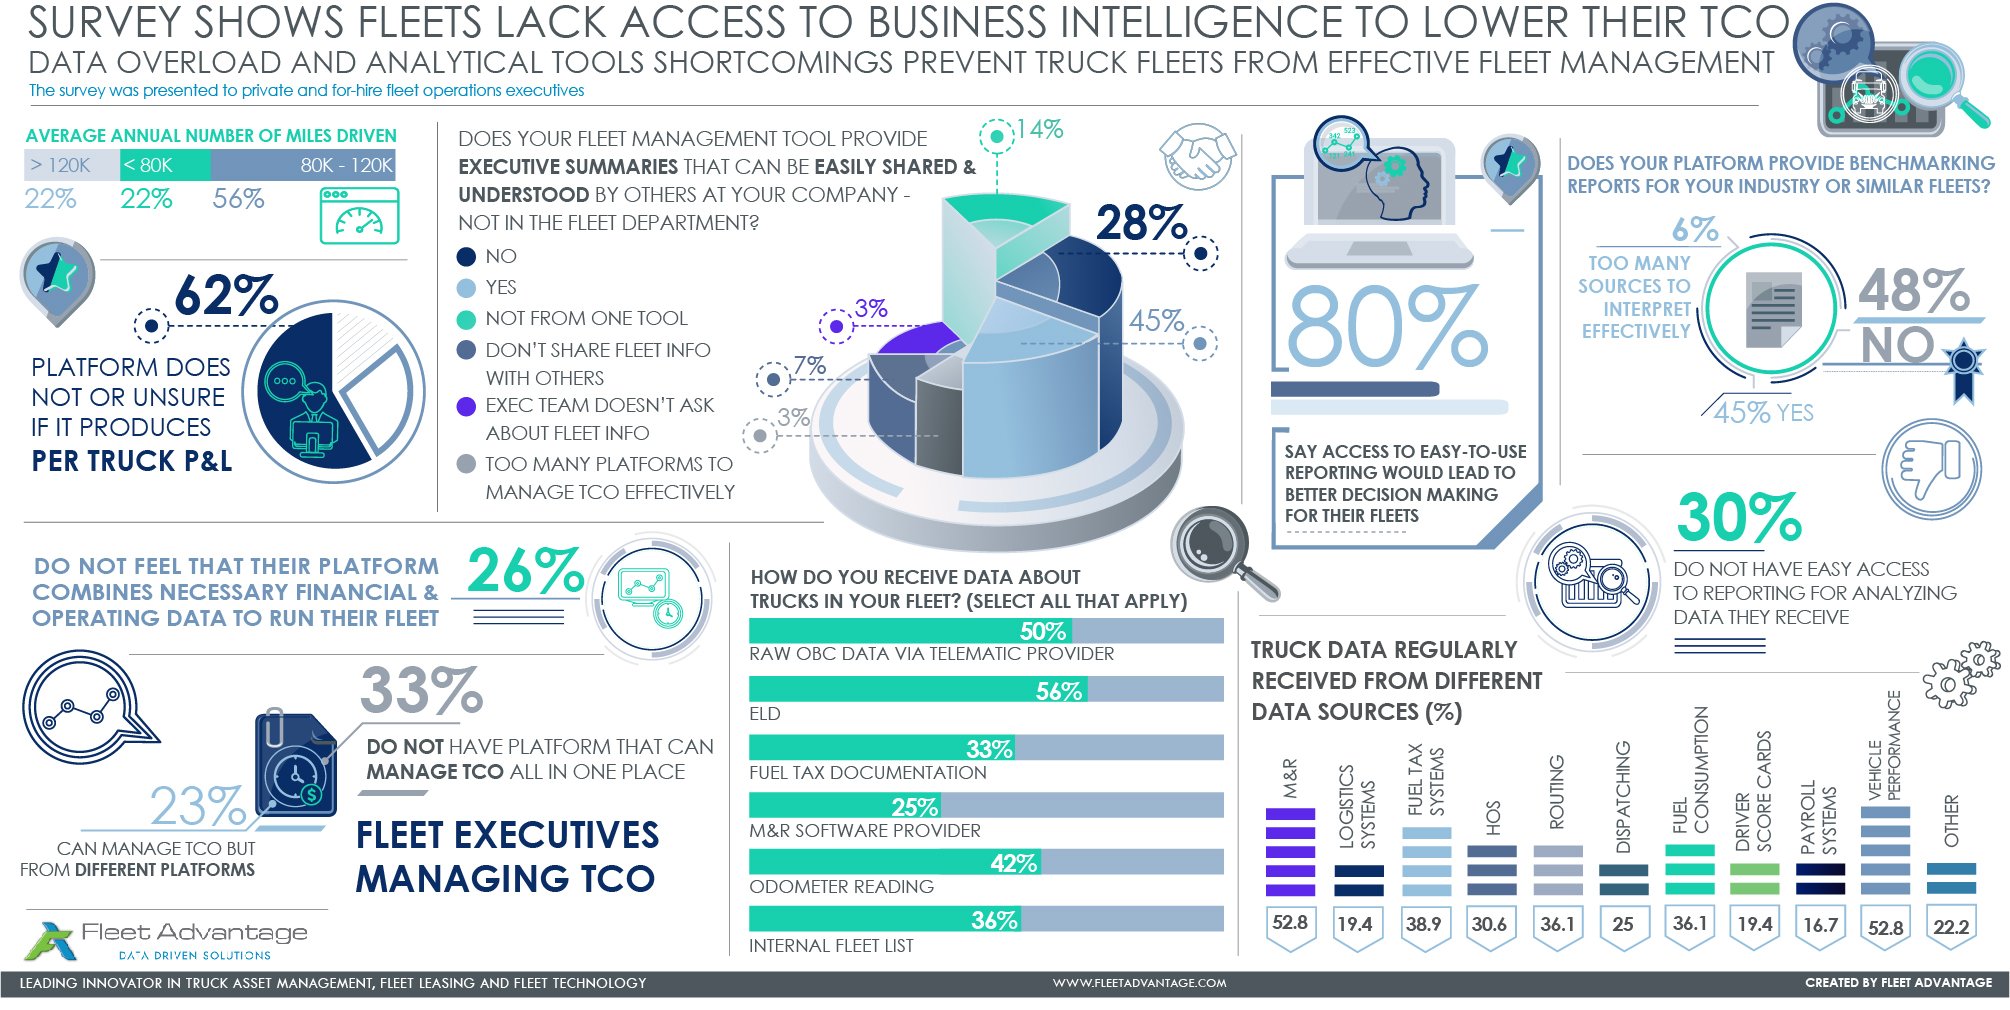 FLEET ADVANTAGE SURVEY SHOWS HOW FLEETS LACK ACCESS TO BUSINESS INTELLIGENCE TO LOWER THEIR TCO-Infograohic 5-22-2019